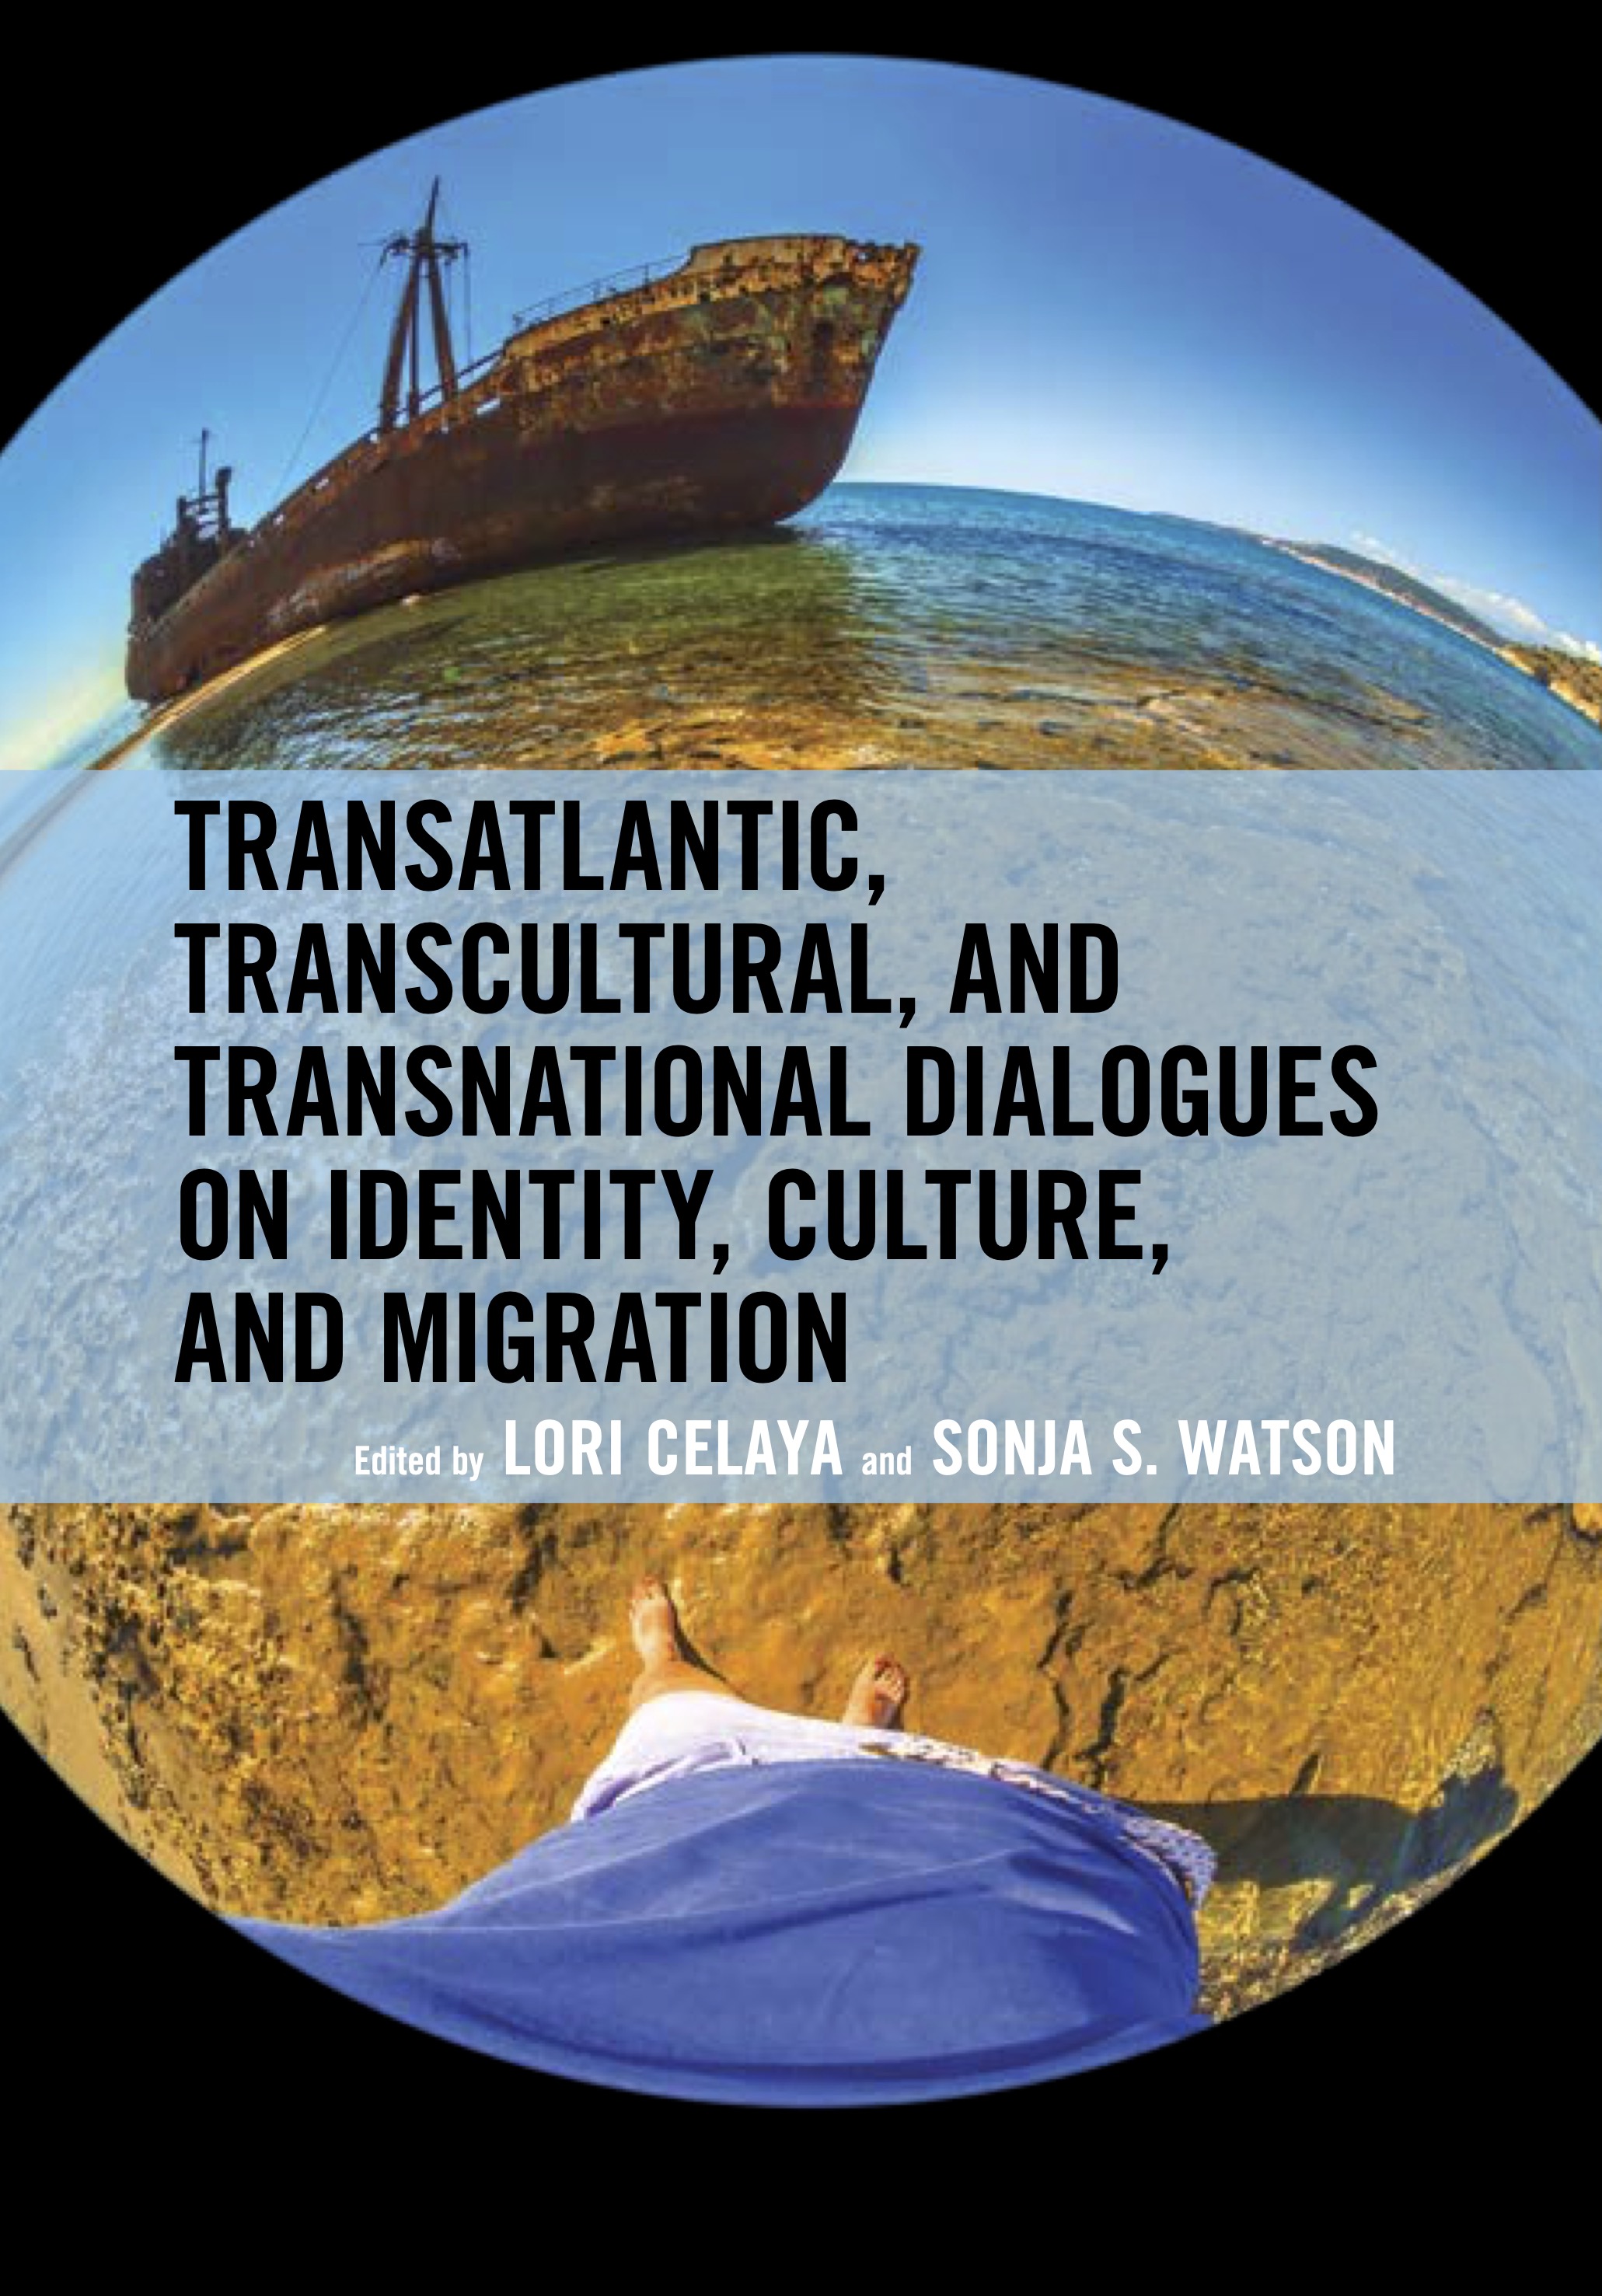 Cover of "Transatlantic, Transcultural, and Transnational Dialogues on Identity, Culture, and Migration” by Sonja Watson, Ph.D. and editor Lori Celaya, Ph.D.